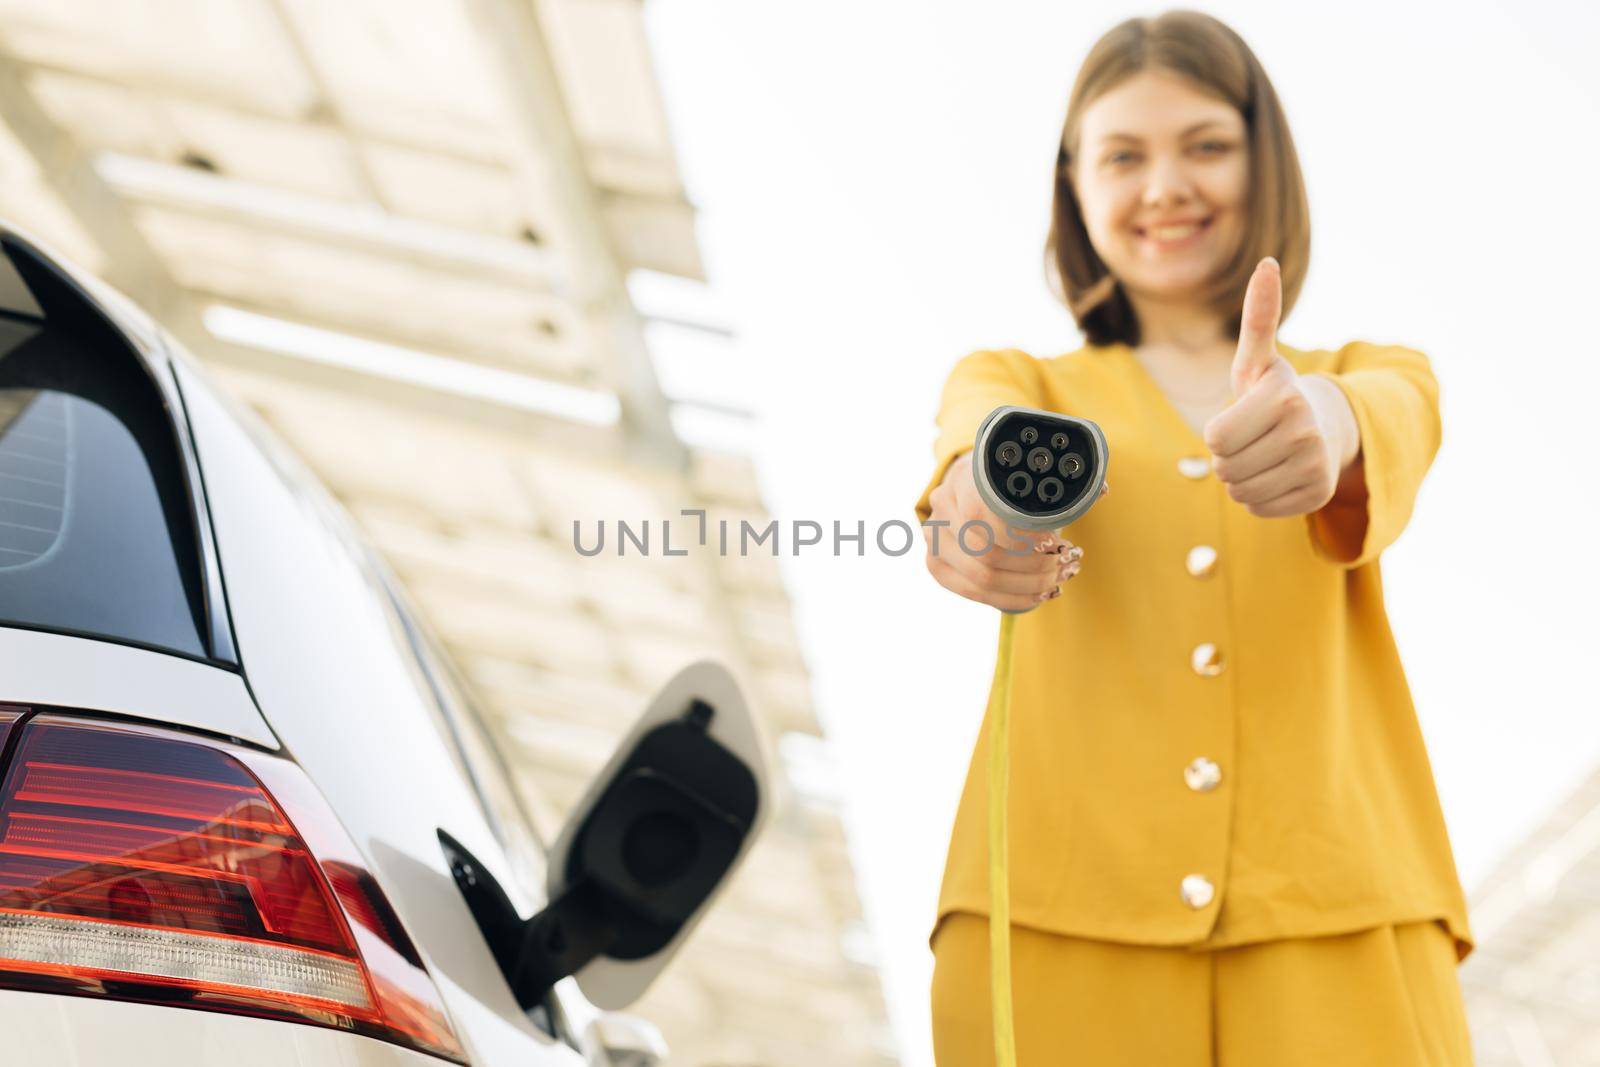 Female showing thumbs up holding power cable supply plugged at electric car charging station. Woman standing near electric charging station looking at camera and showing thumb up.